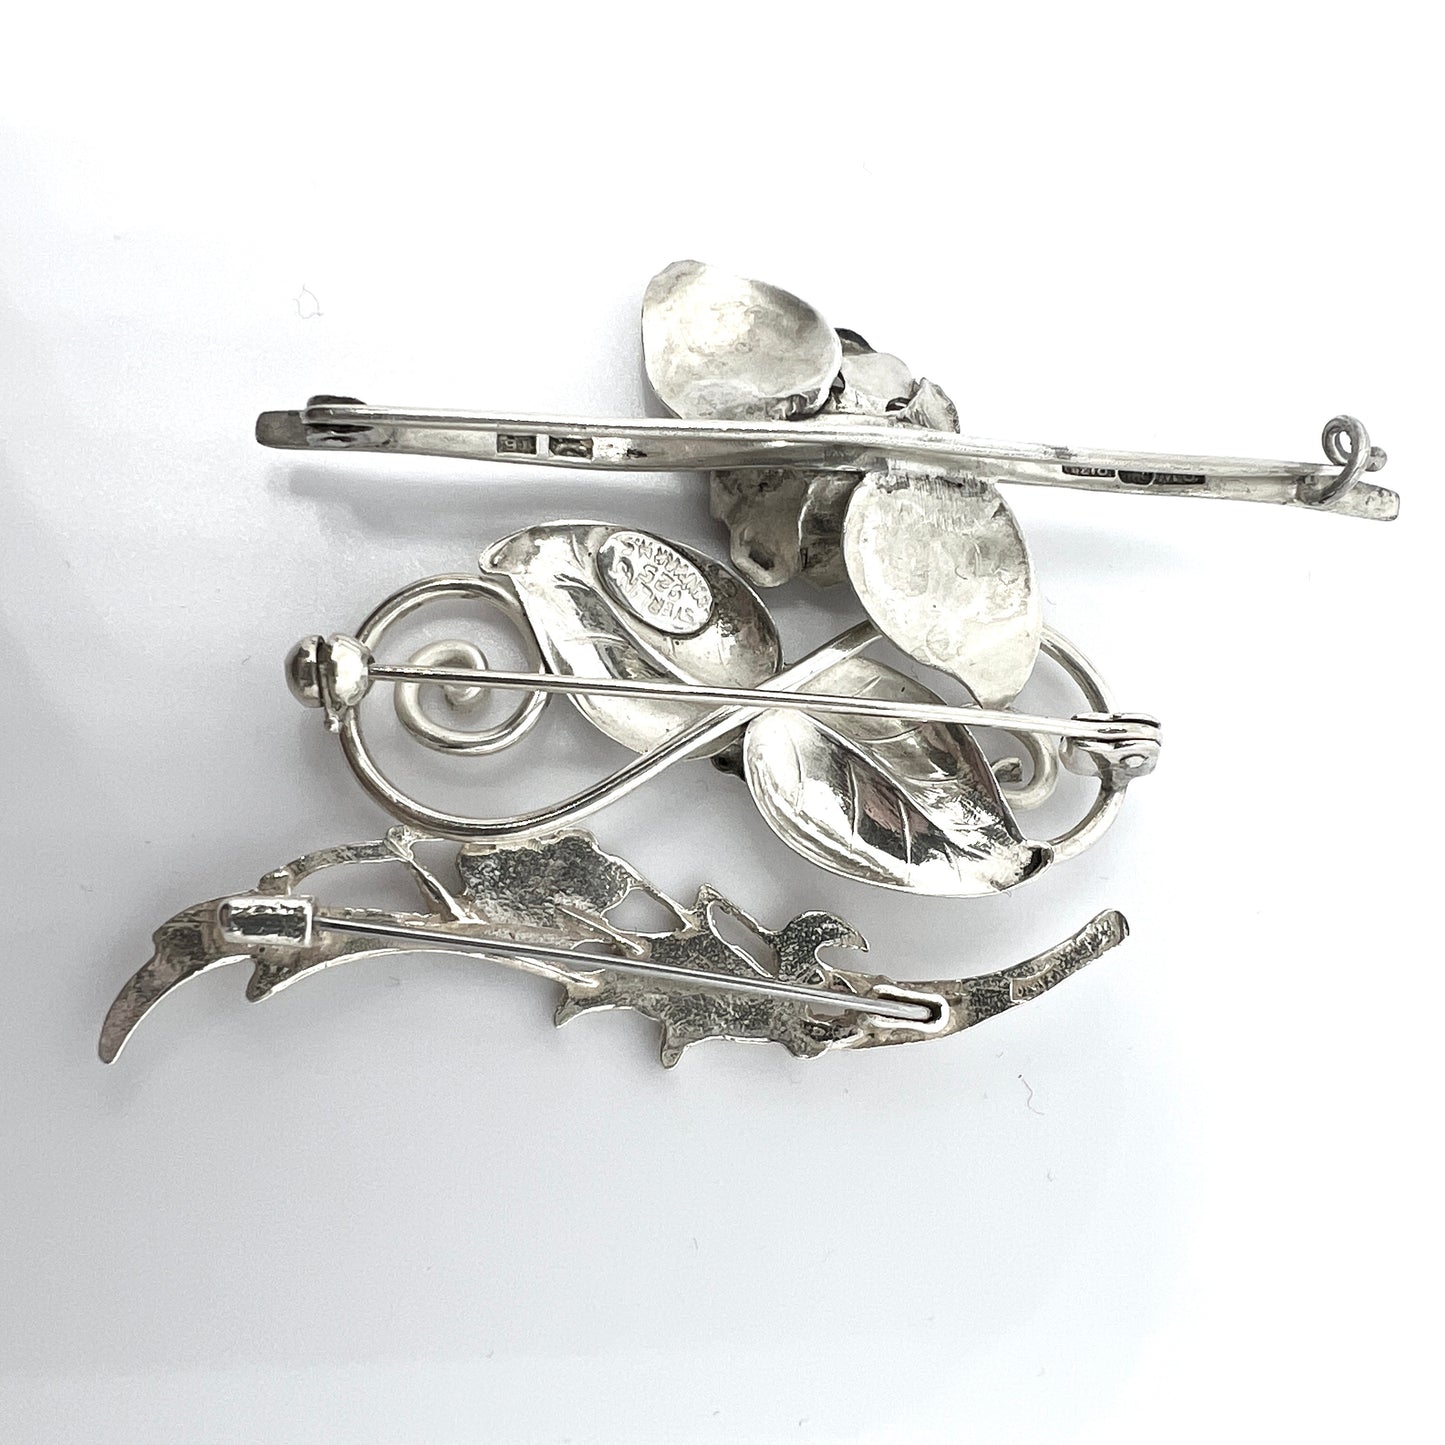 Finland, Denmark, Norway 1940-50s. 3 Vintage Solid Silver Flower Brooches.